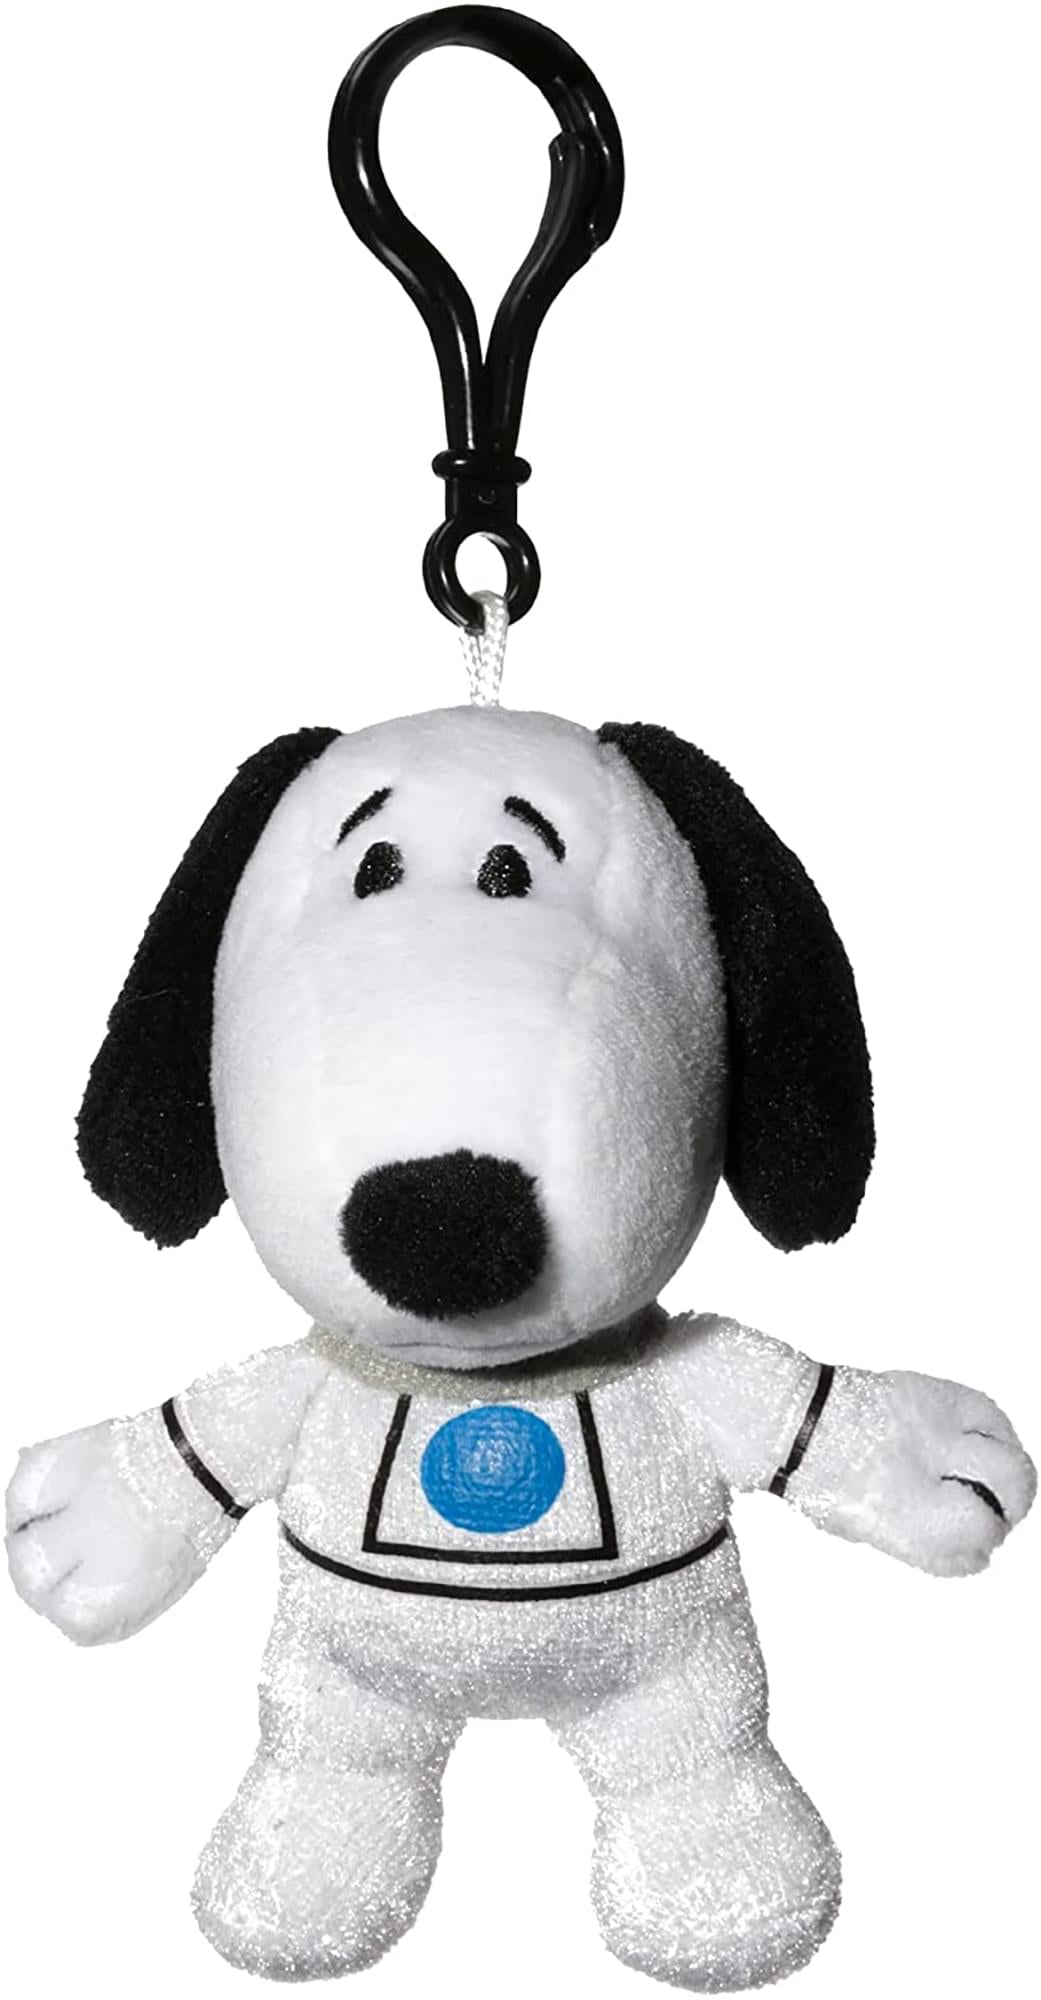 Snoopy In Space 4 Inch Plush Clip , Snoopy In White Astronaut Suit